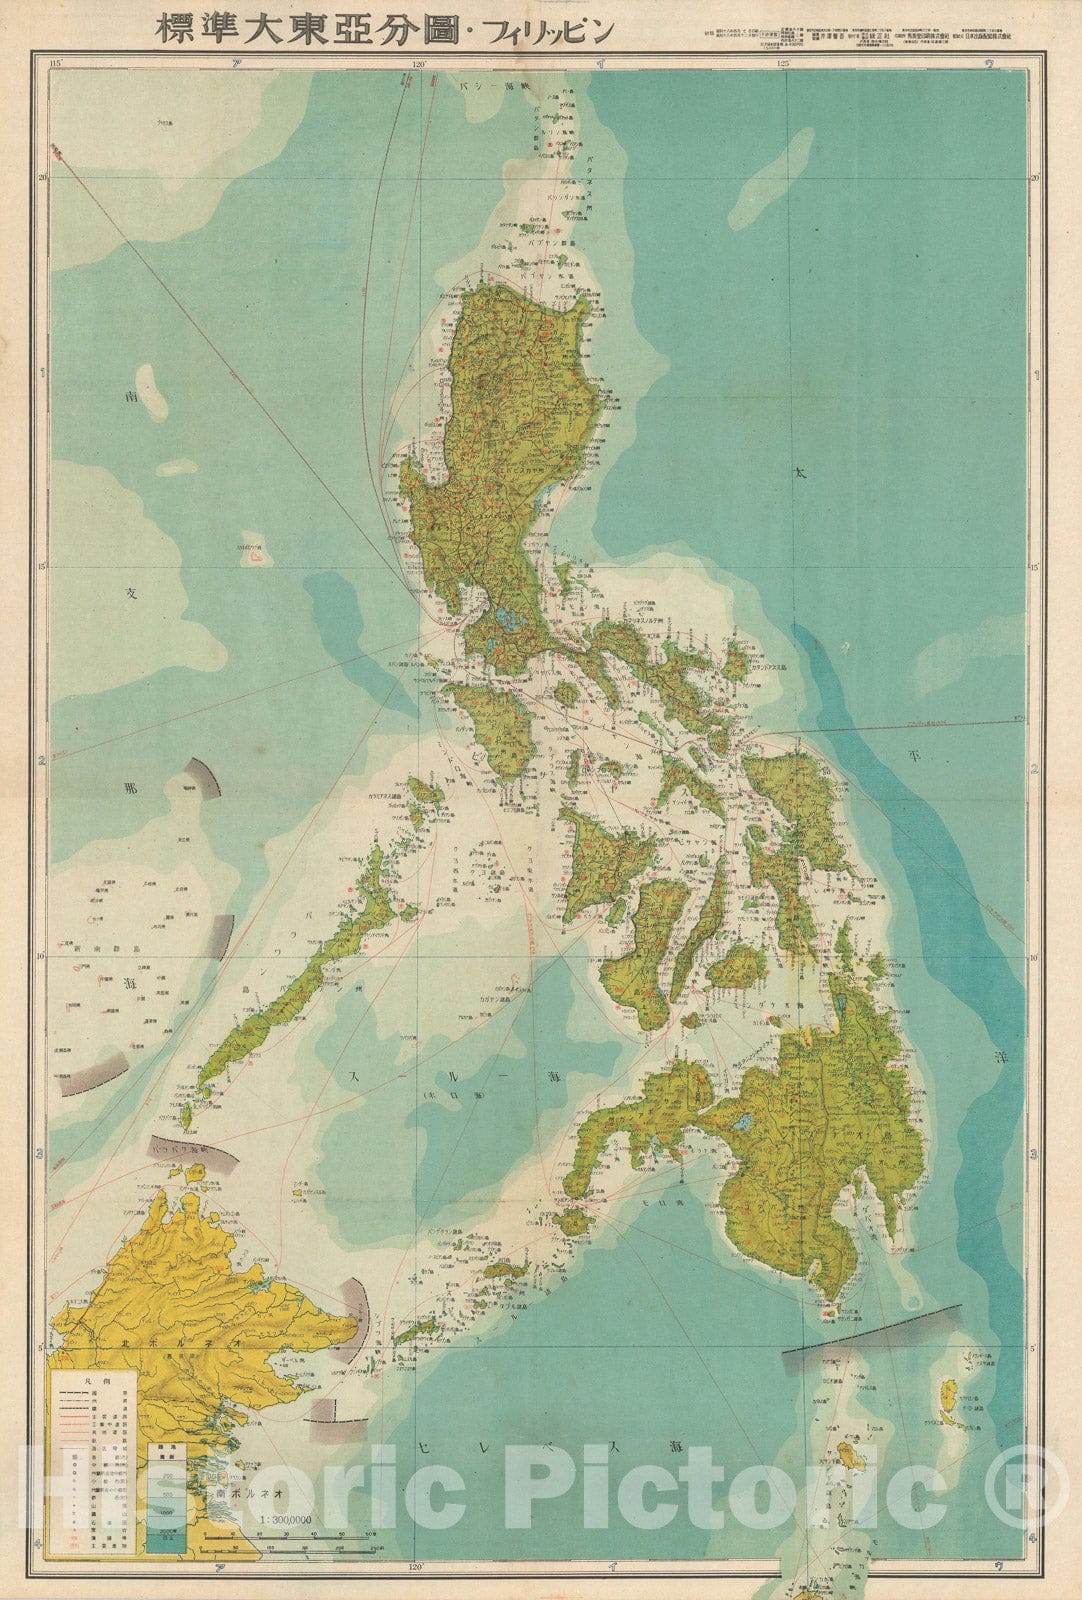 Historic Map : Japanese Coprosperity Sphere Map of The Philippines, 1943, Vintage Wall Art